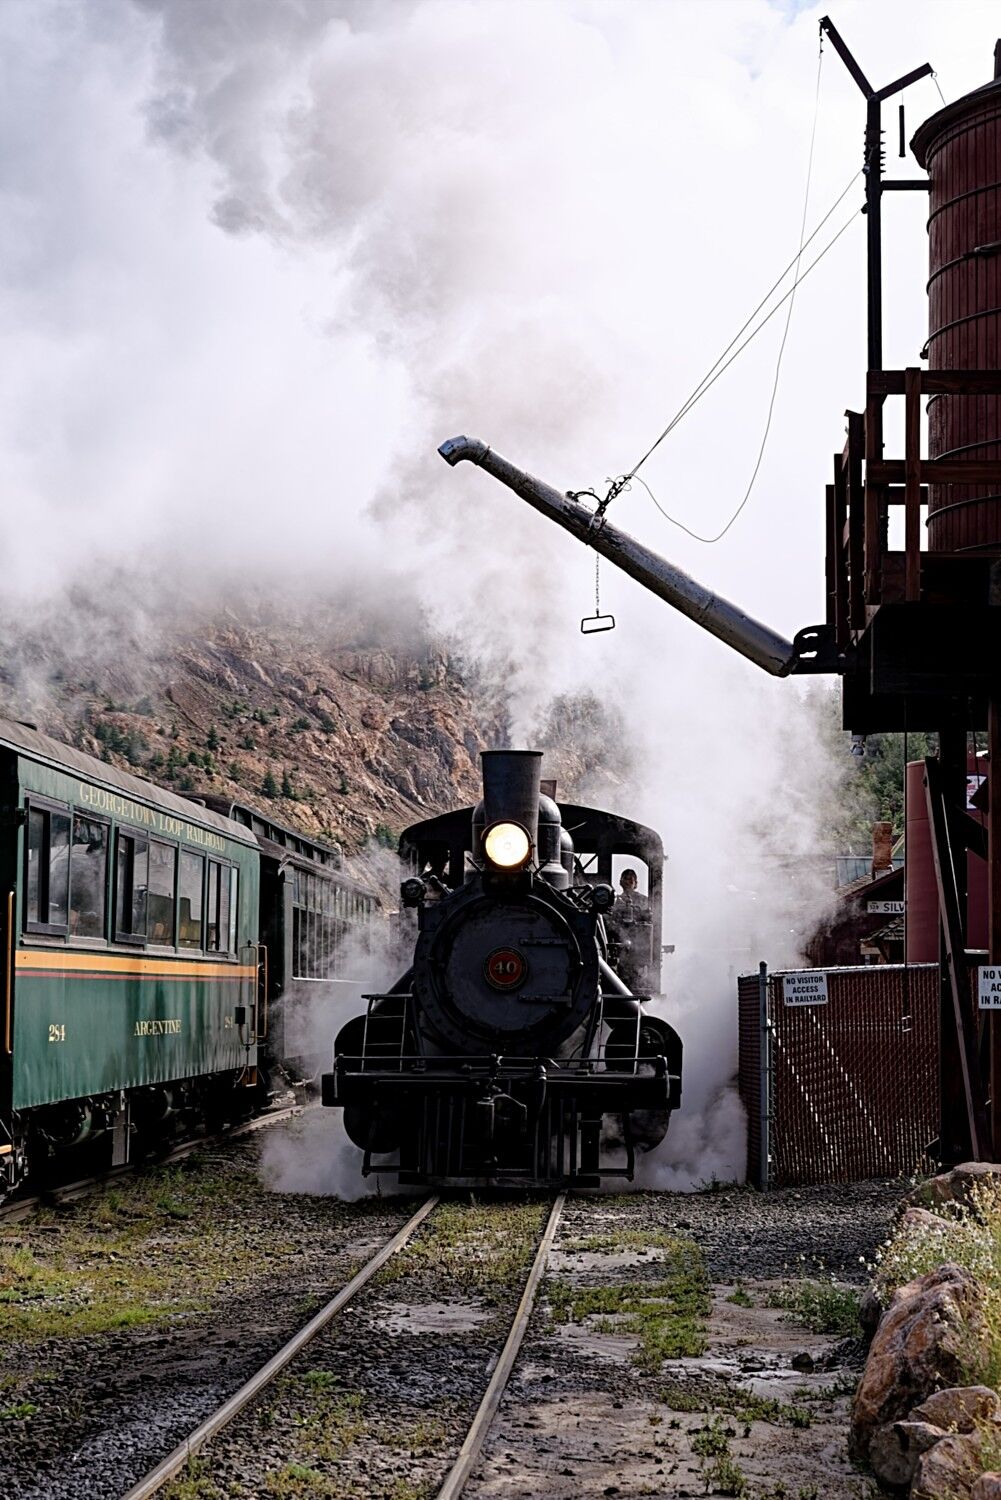 Some steam action in Silver Plume Colorado